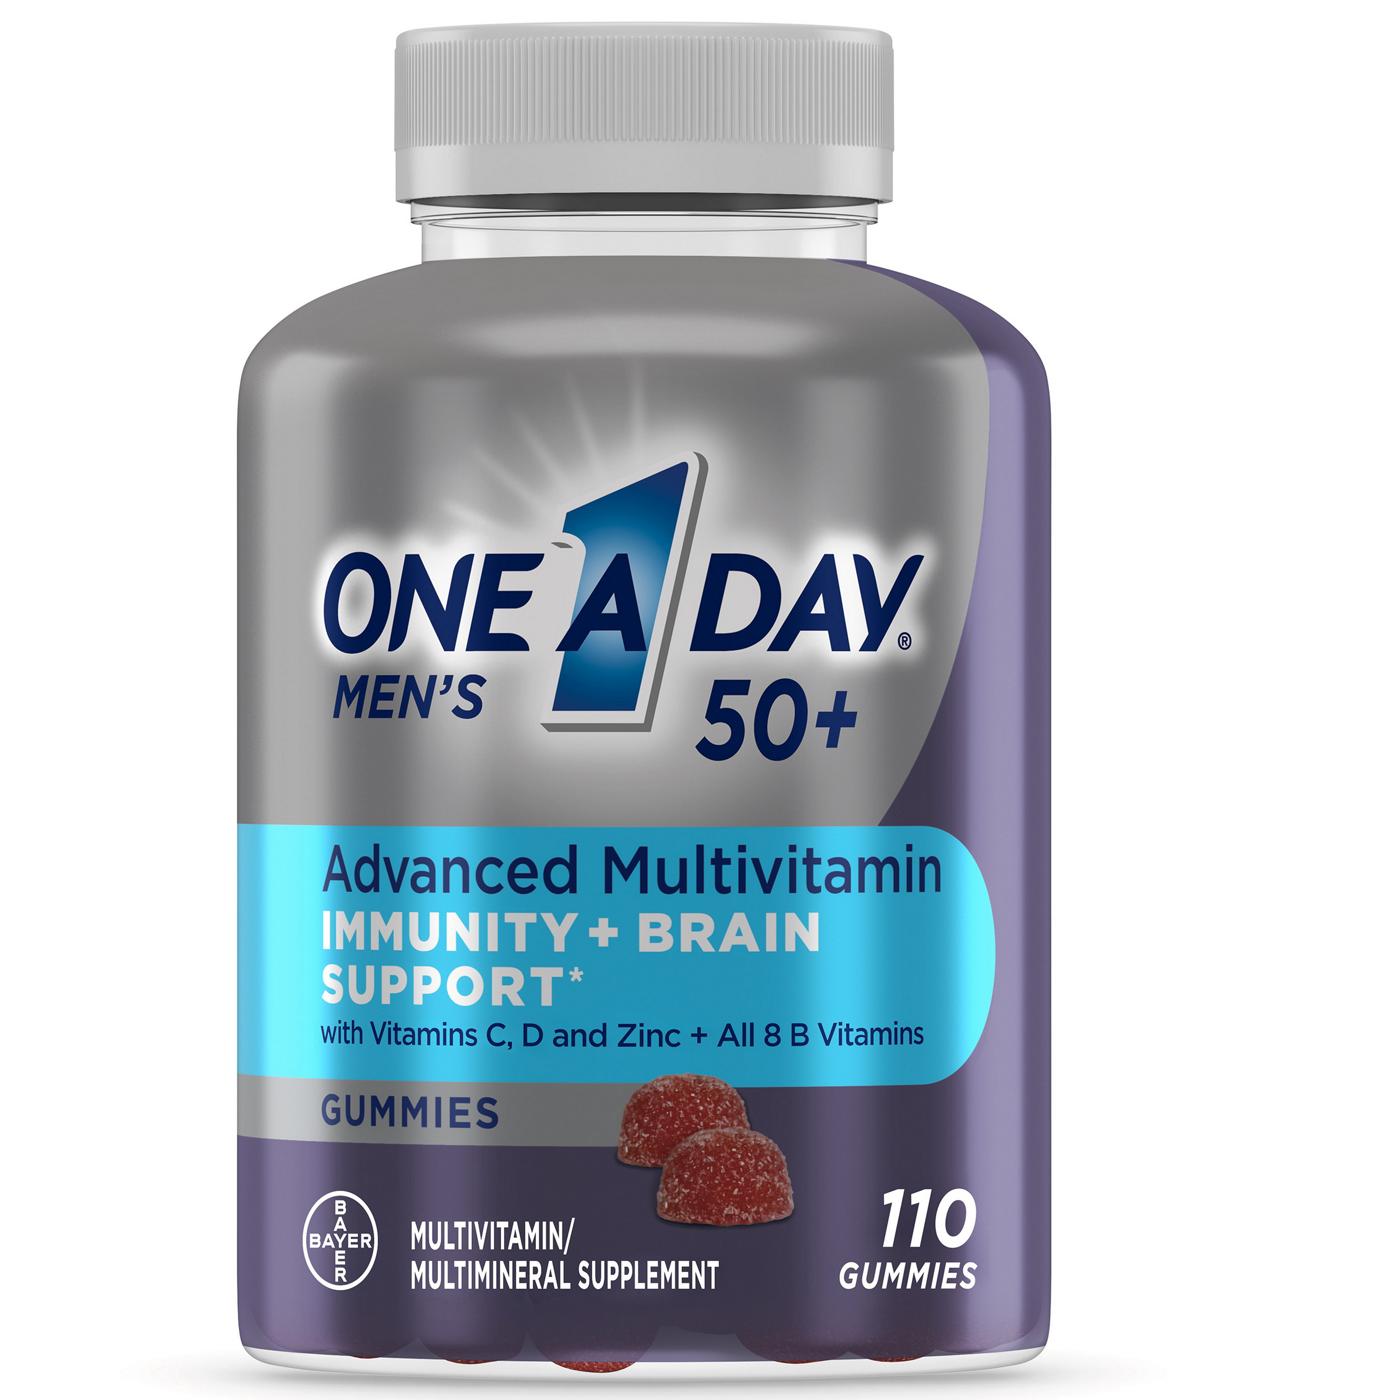 One A Day Men's 50+ Advanced Multivitamin Gummies; image 1 of 5